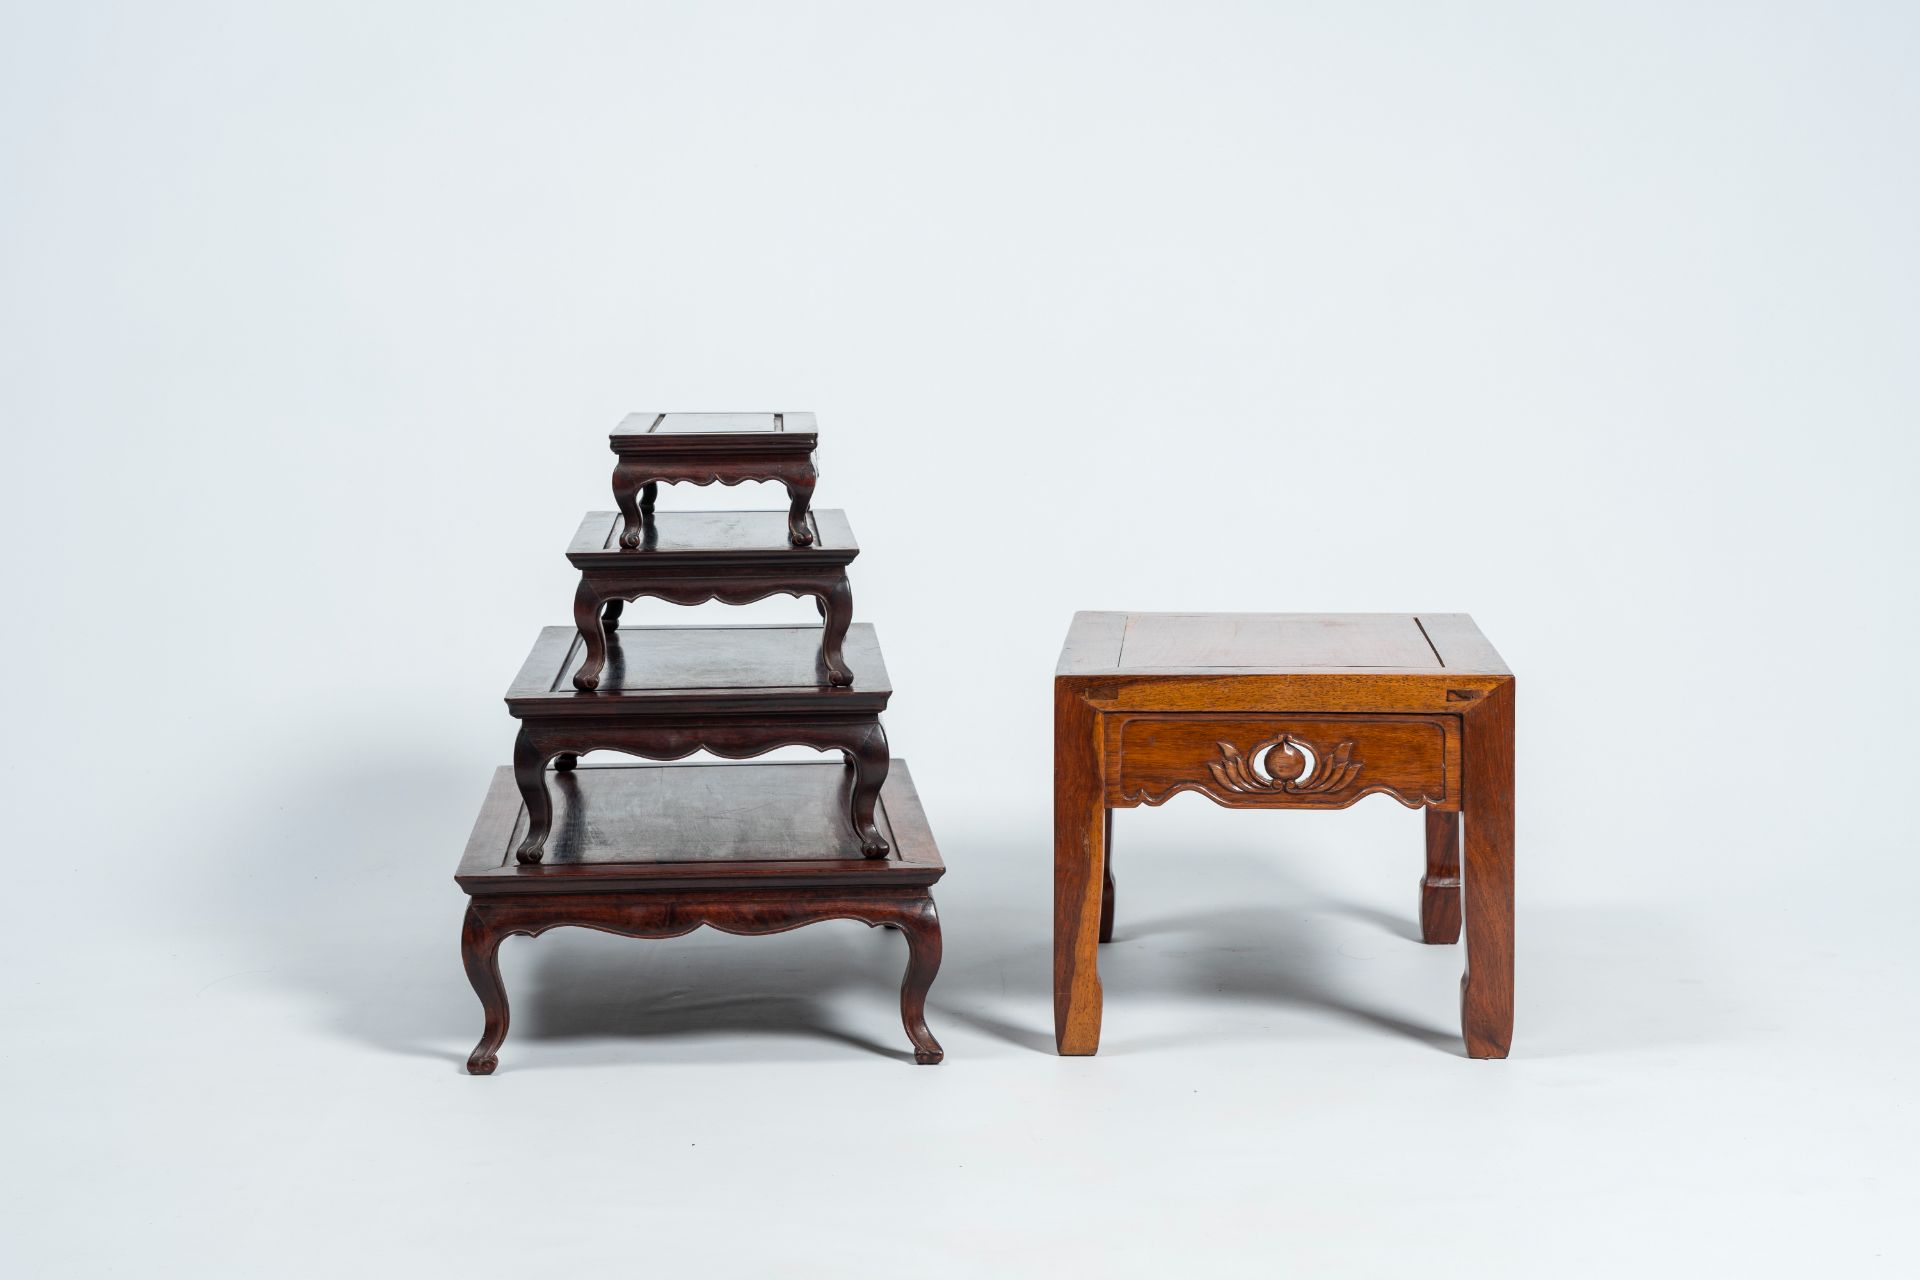 Four Chinese rectangular wood nesting tables and a side table with floral design, 20th C. - Image 6 of 8